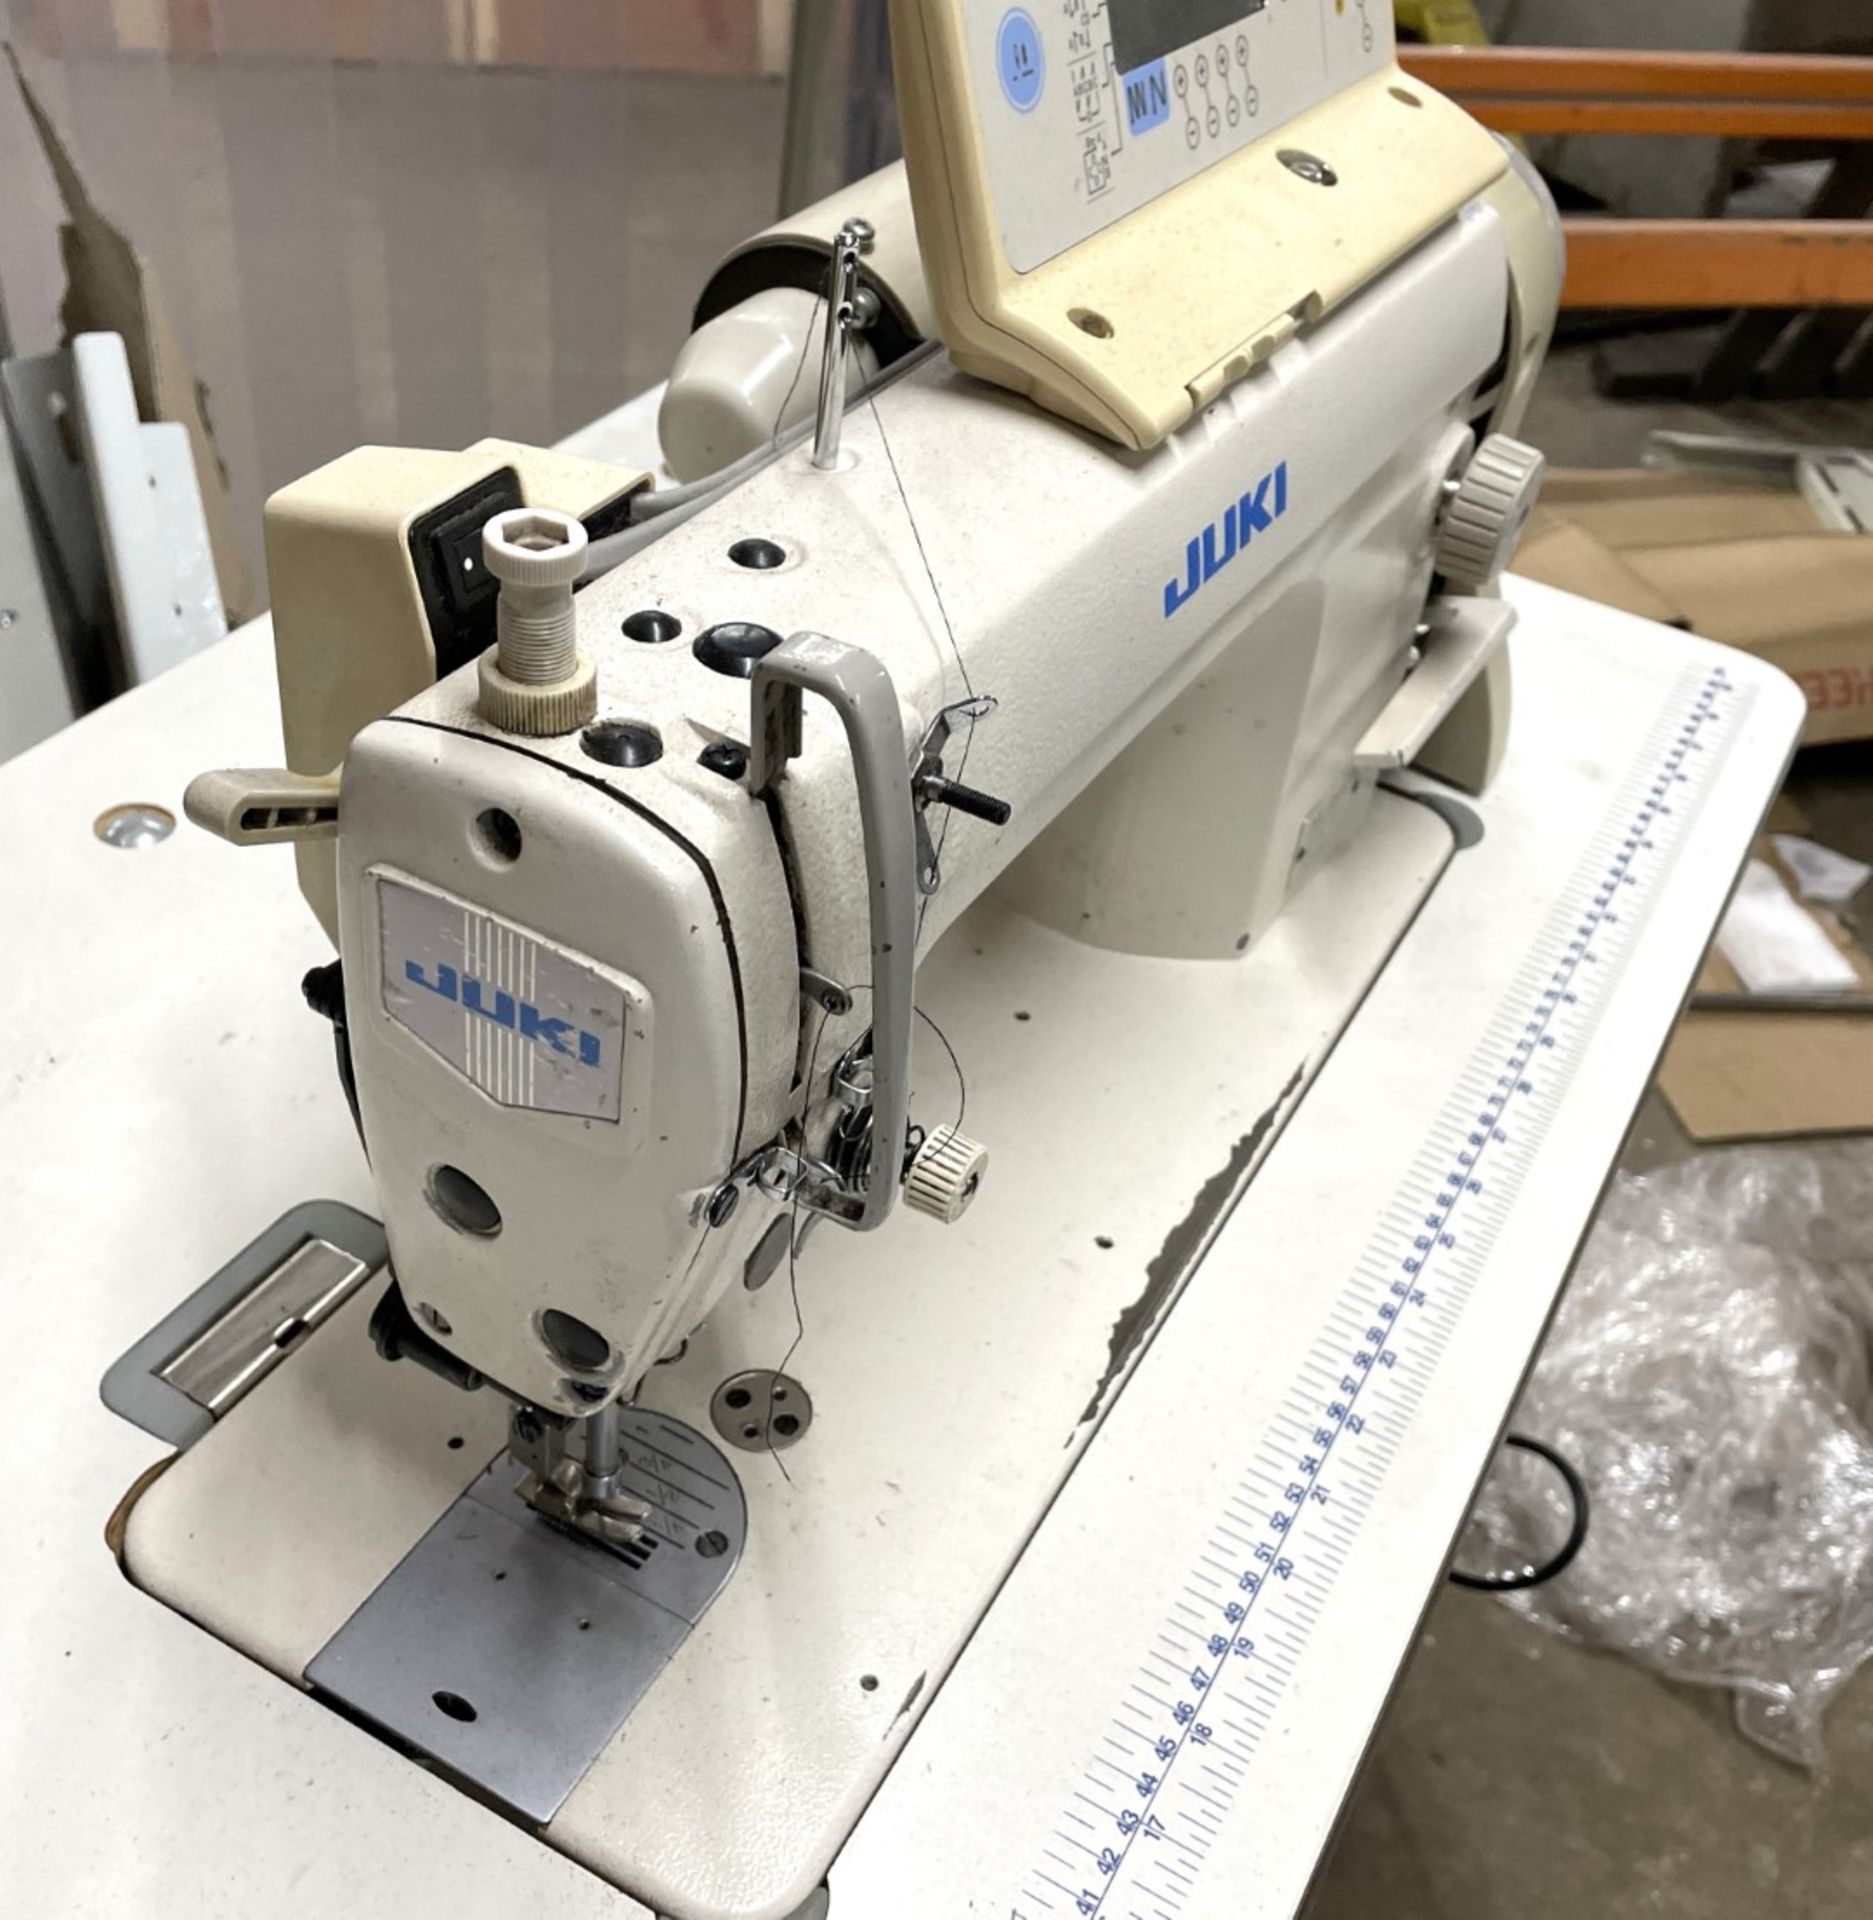 1 x Juki DDL850 Single Needle Automatic Lockstitch Industrial Sewing Machine With Table - Image 7 of 16